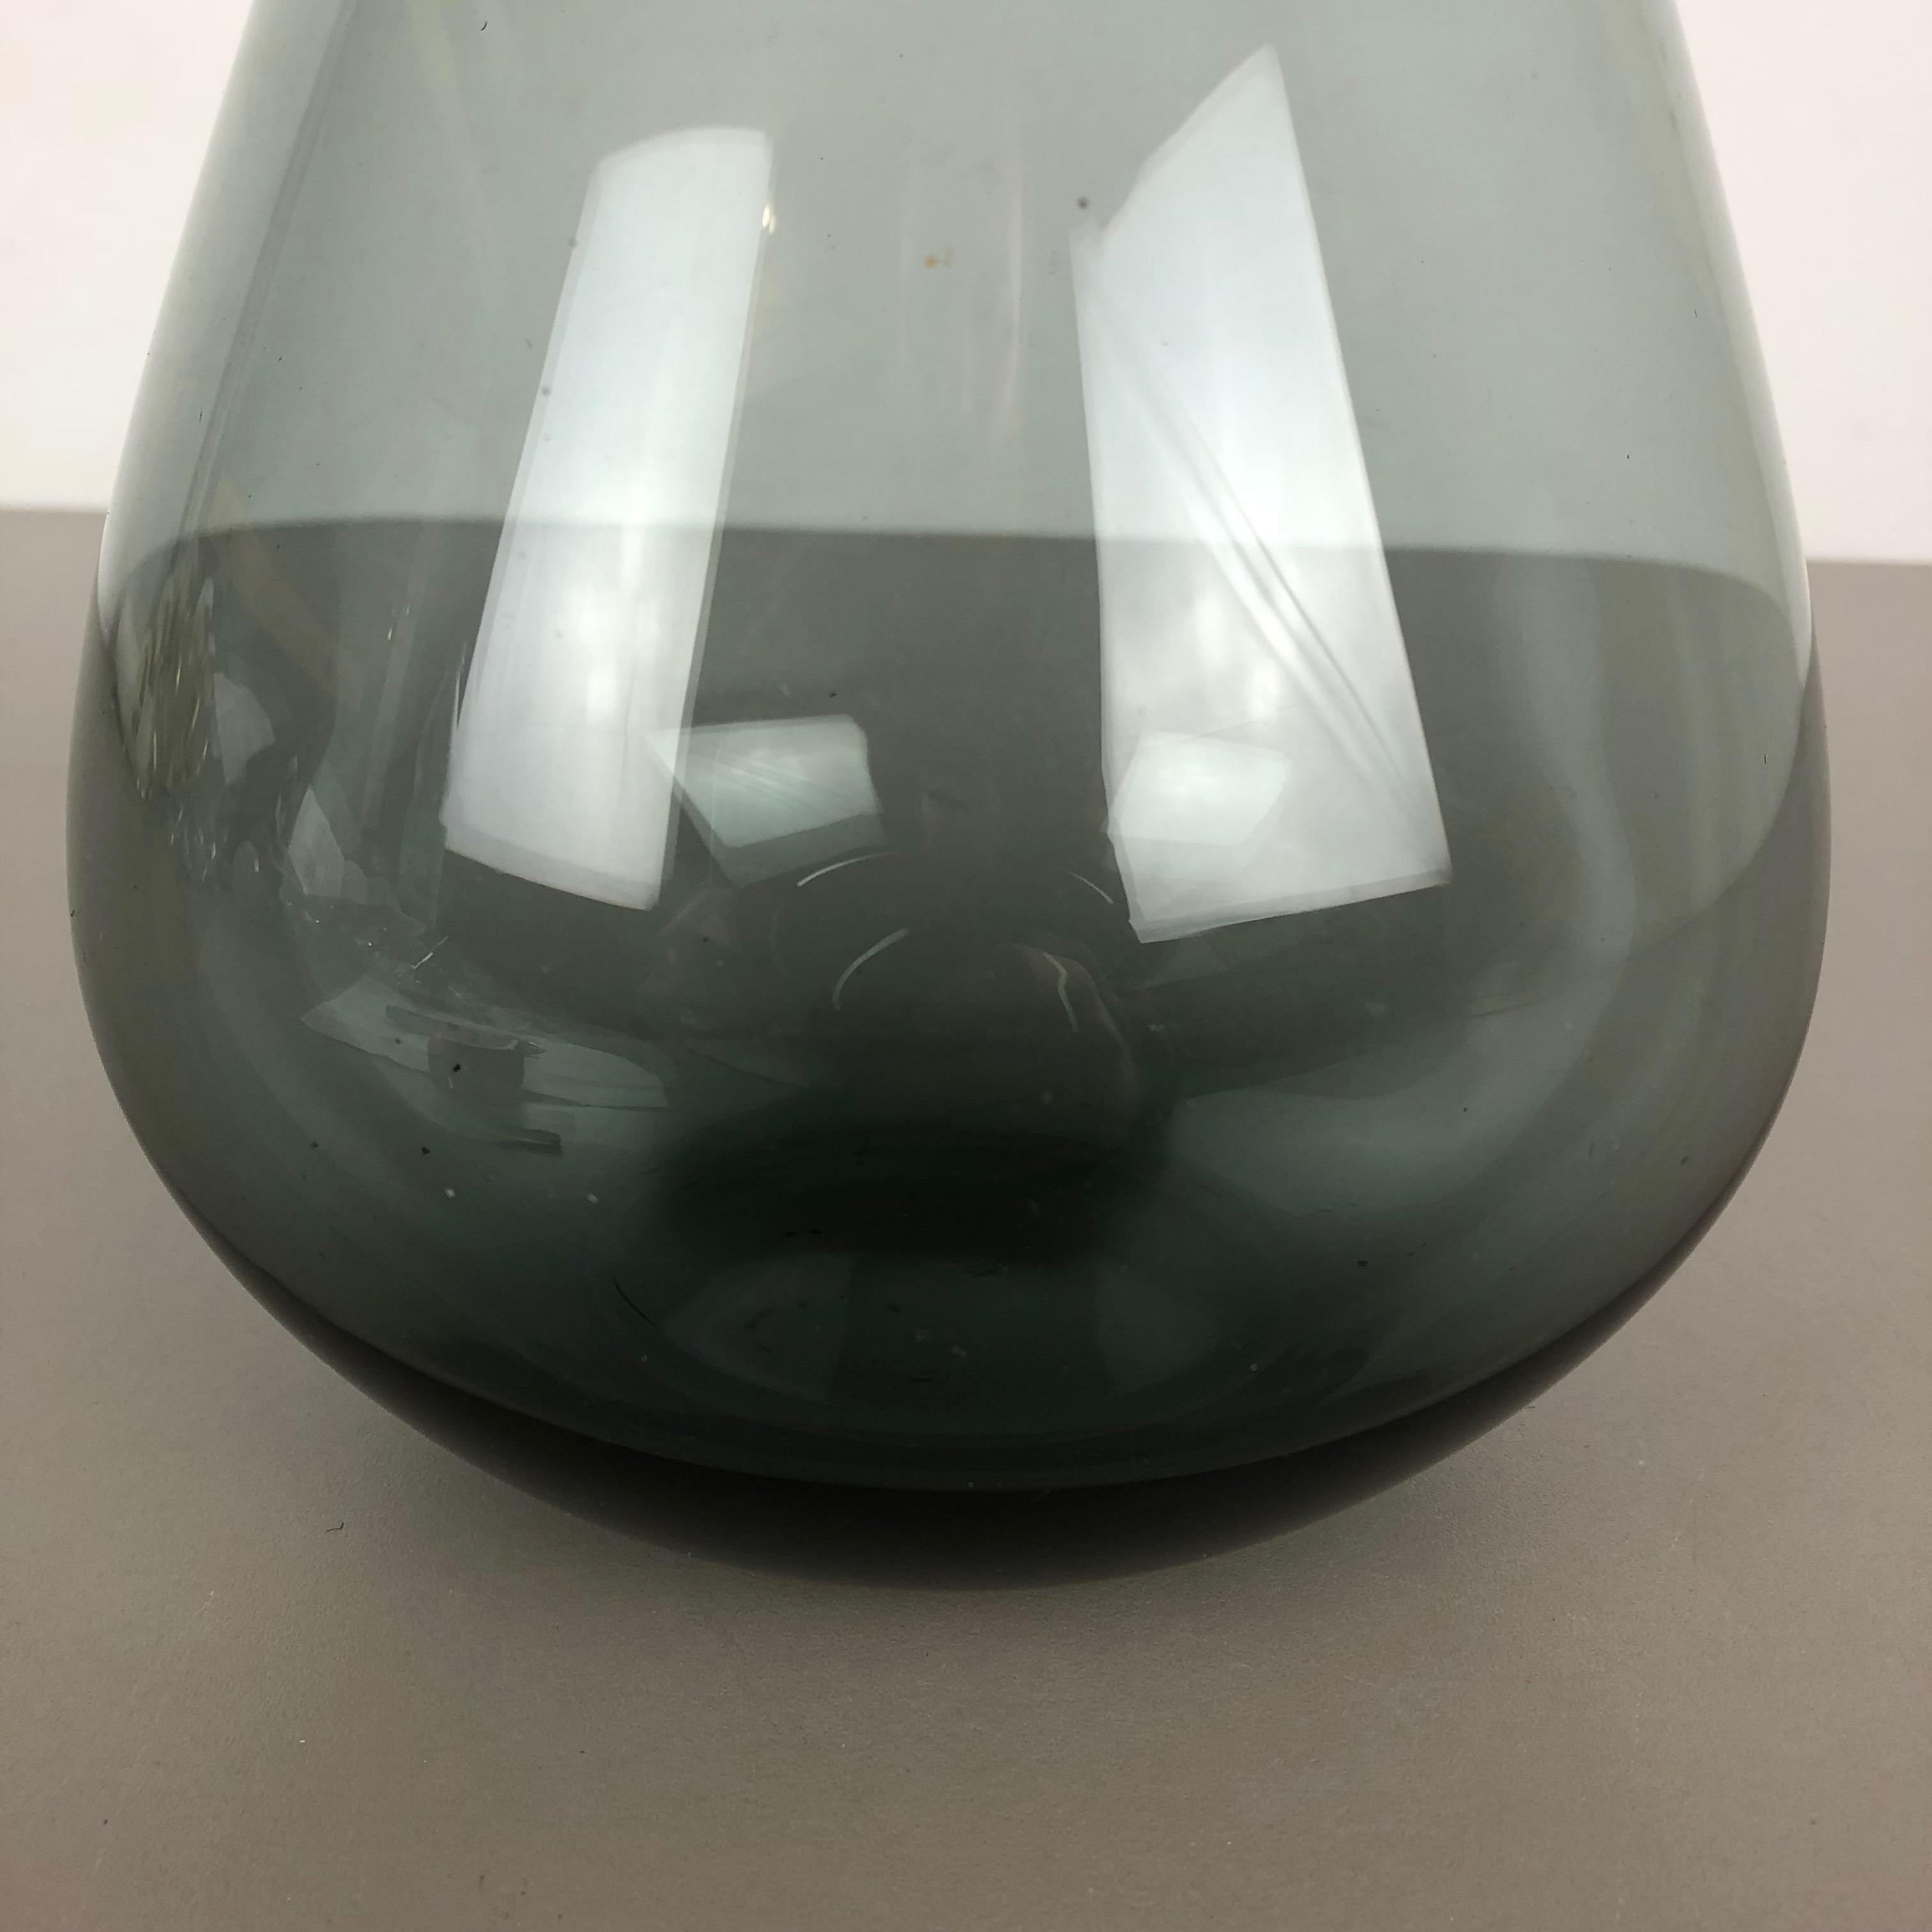 Vintage 1960s Turmalin Vase by Wilhelm Wagenfeld for WMF, Germany Bauhaus For Sale 8